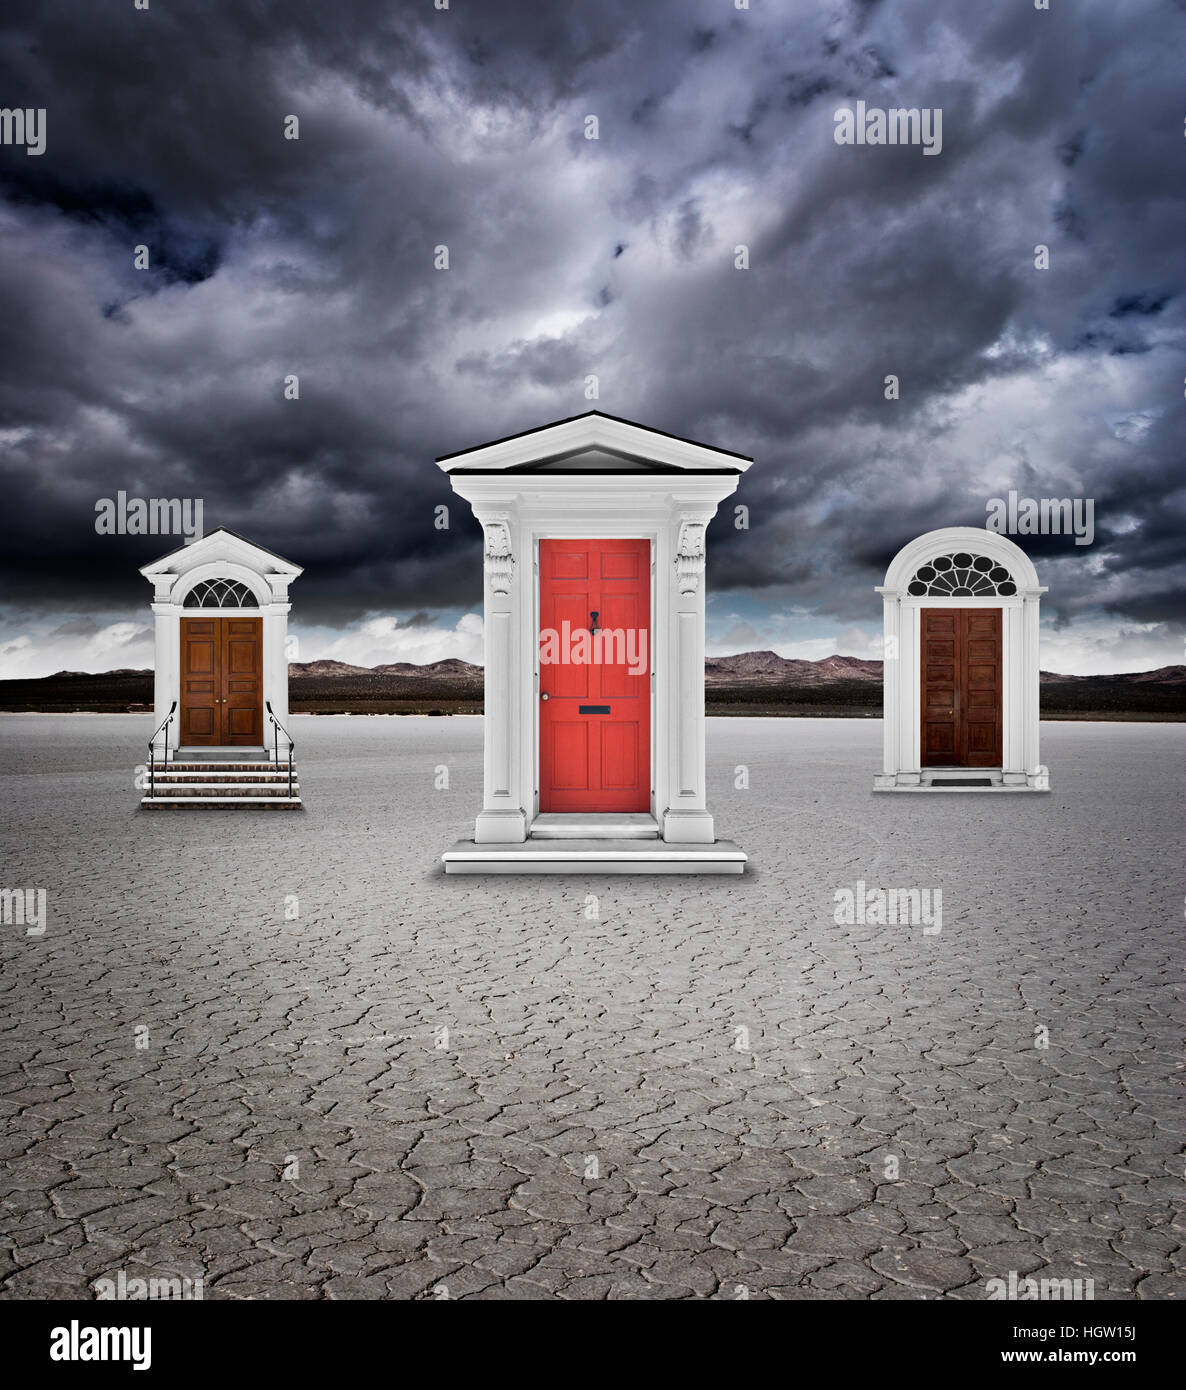 Three Doors In A Dry Lake Bed Under A Stormy Sky Stock Photo